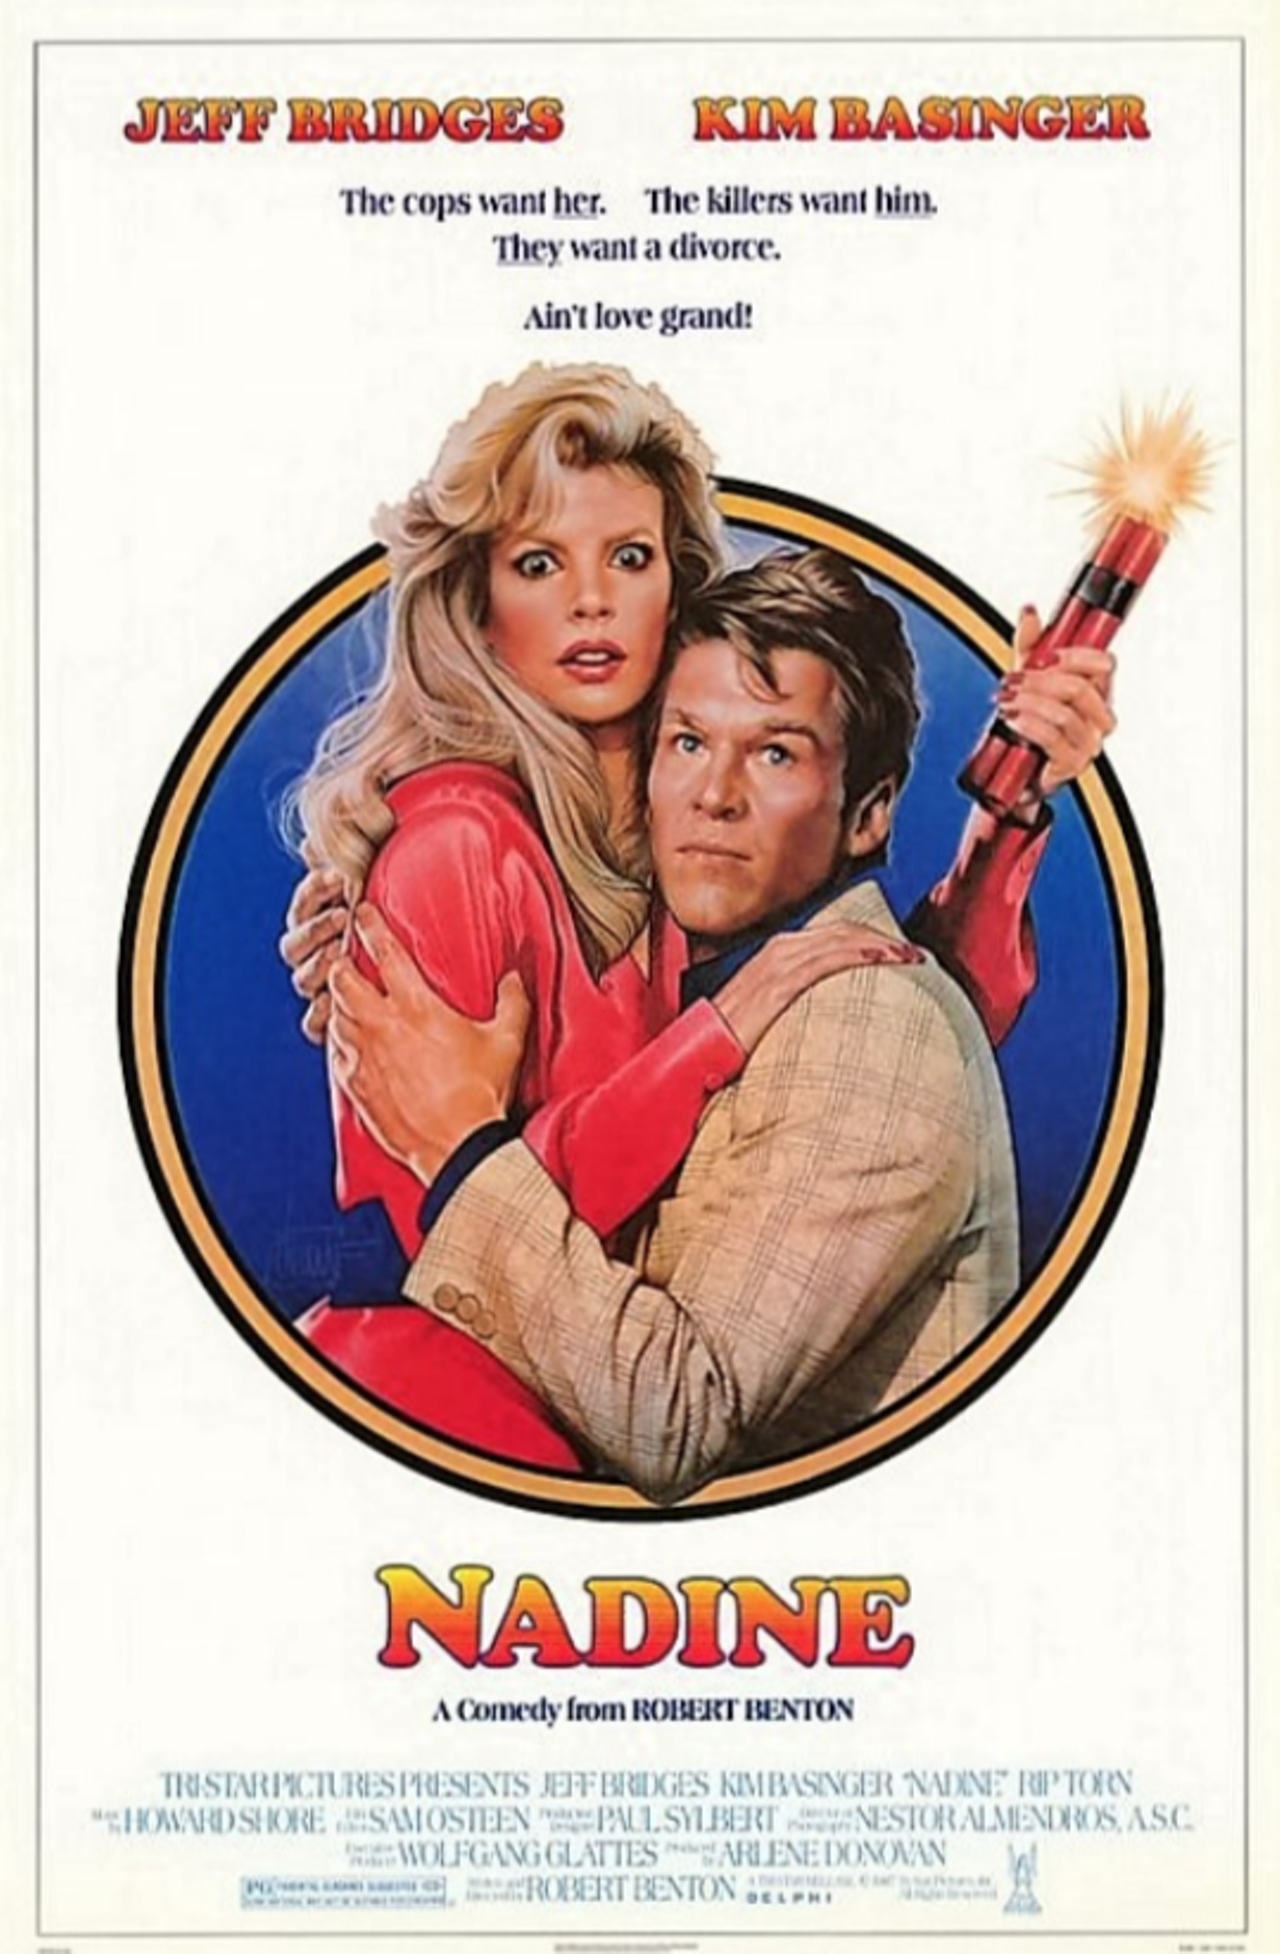 Nadine
Set in 1954 Austin, this 1987 film stars Kim Basinger and Jeff Bridges. Playing the title character, Basinger goes to a photographer who has risque photos of her, and ends up in the middle of a murder scene when she goes to get the prints back. She grabs an envelope with her name of it – which doesn’t actually have her photos. Instead, she gets stolen plans for a new highway development, prompting Bridges’ character to scheme to get rich. And Bridges’ mistress in the film is a former Pecan Queen who works at the Lone Star Brewing Company. Oh, and Nadine is pregnant and the couple wants a divorce. There’s a lot going on and some scenes were shot in San Antonio, so you might as well watch it.
Photo via IMDB / Nadine